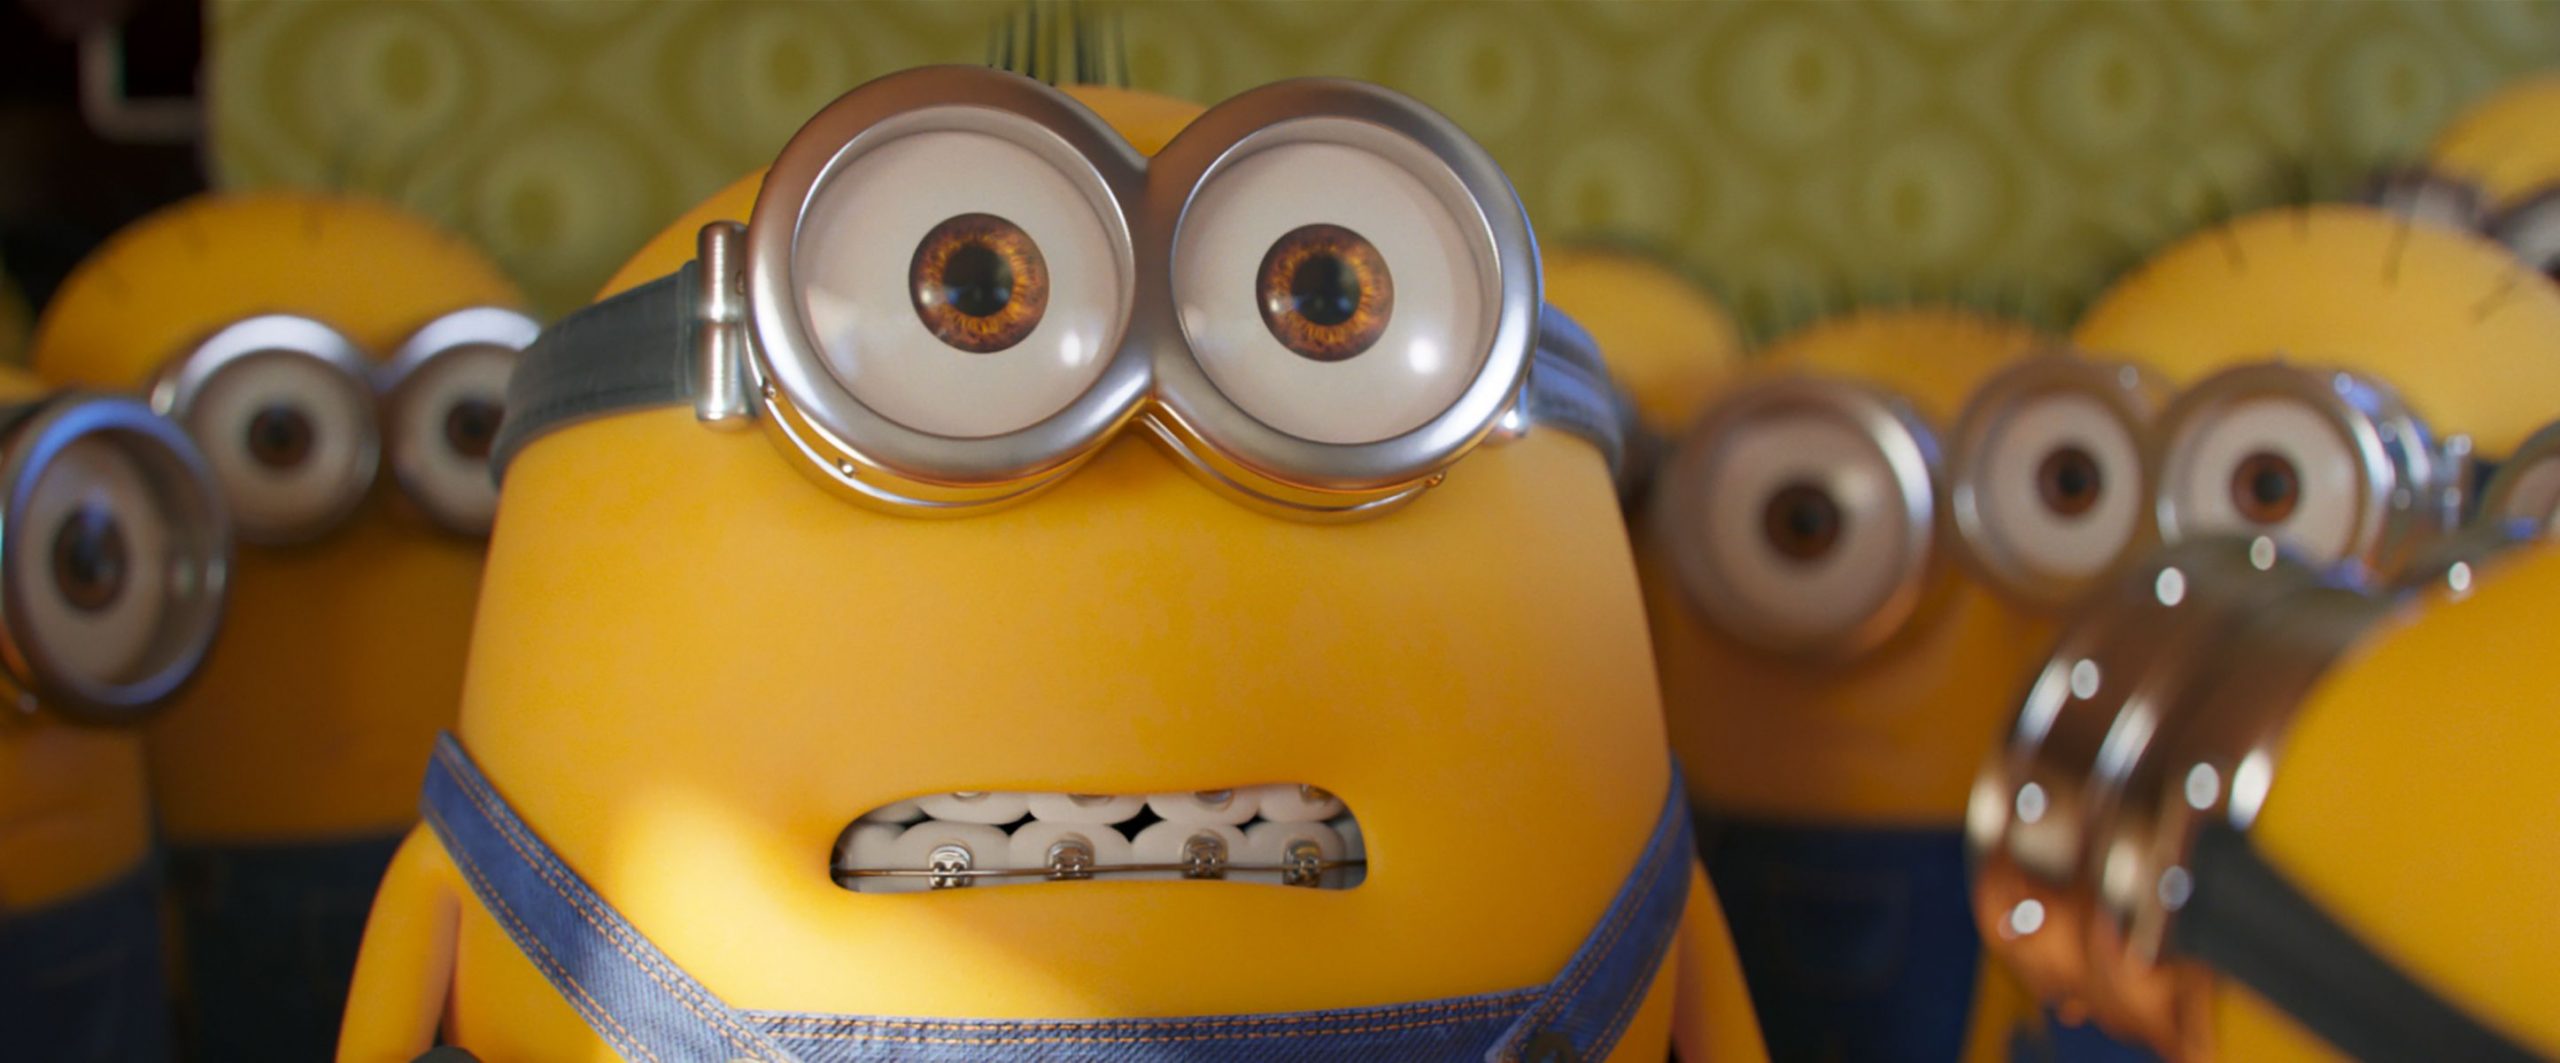 Despicable Me by EarthXXII on DeviantArt